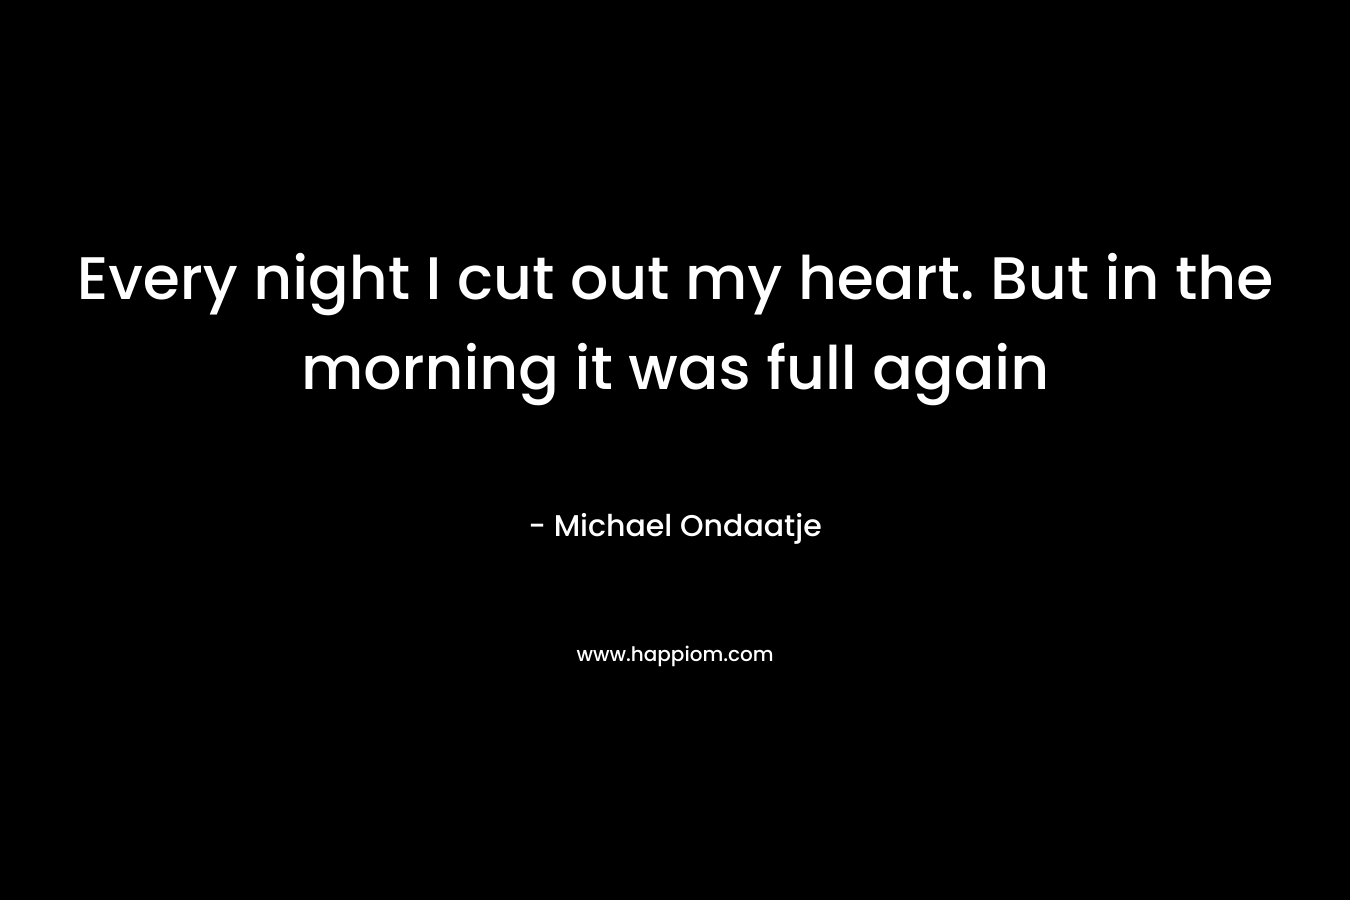 Every night I cut out my heart. But in the morning it was full again